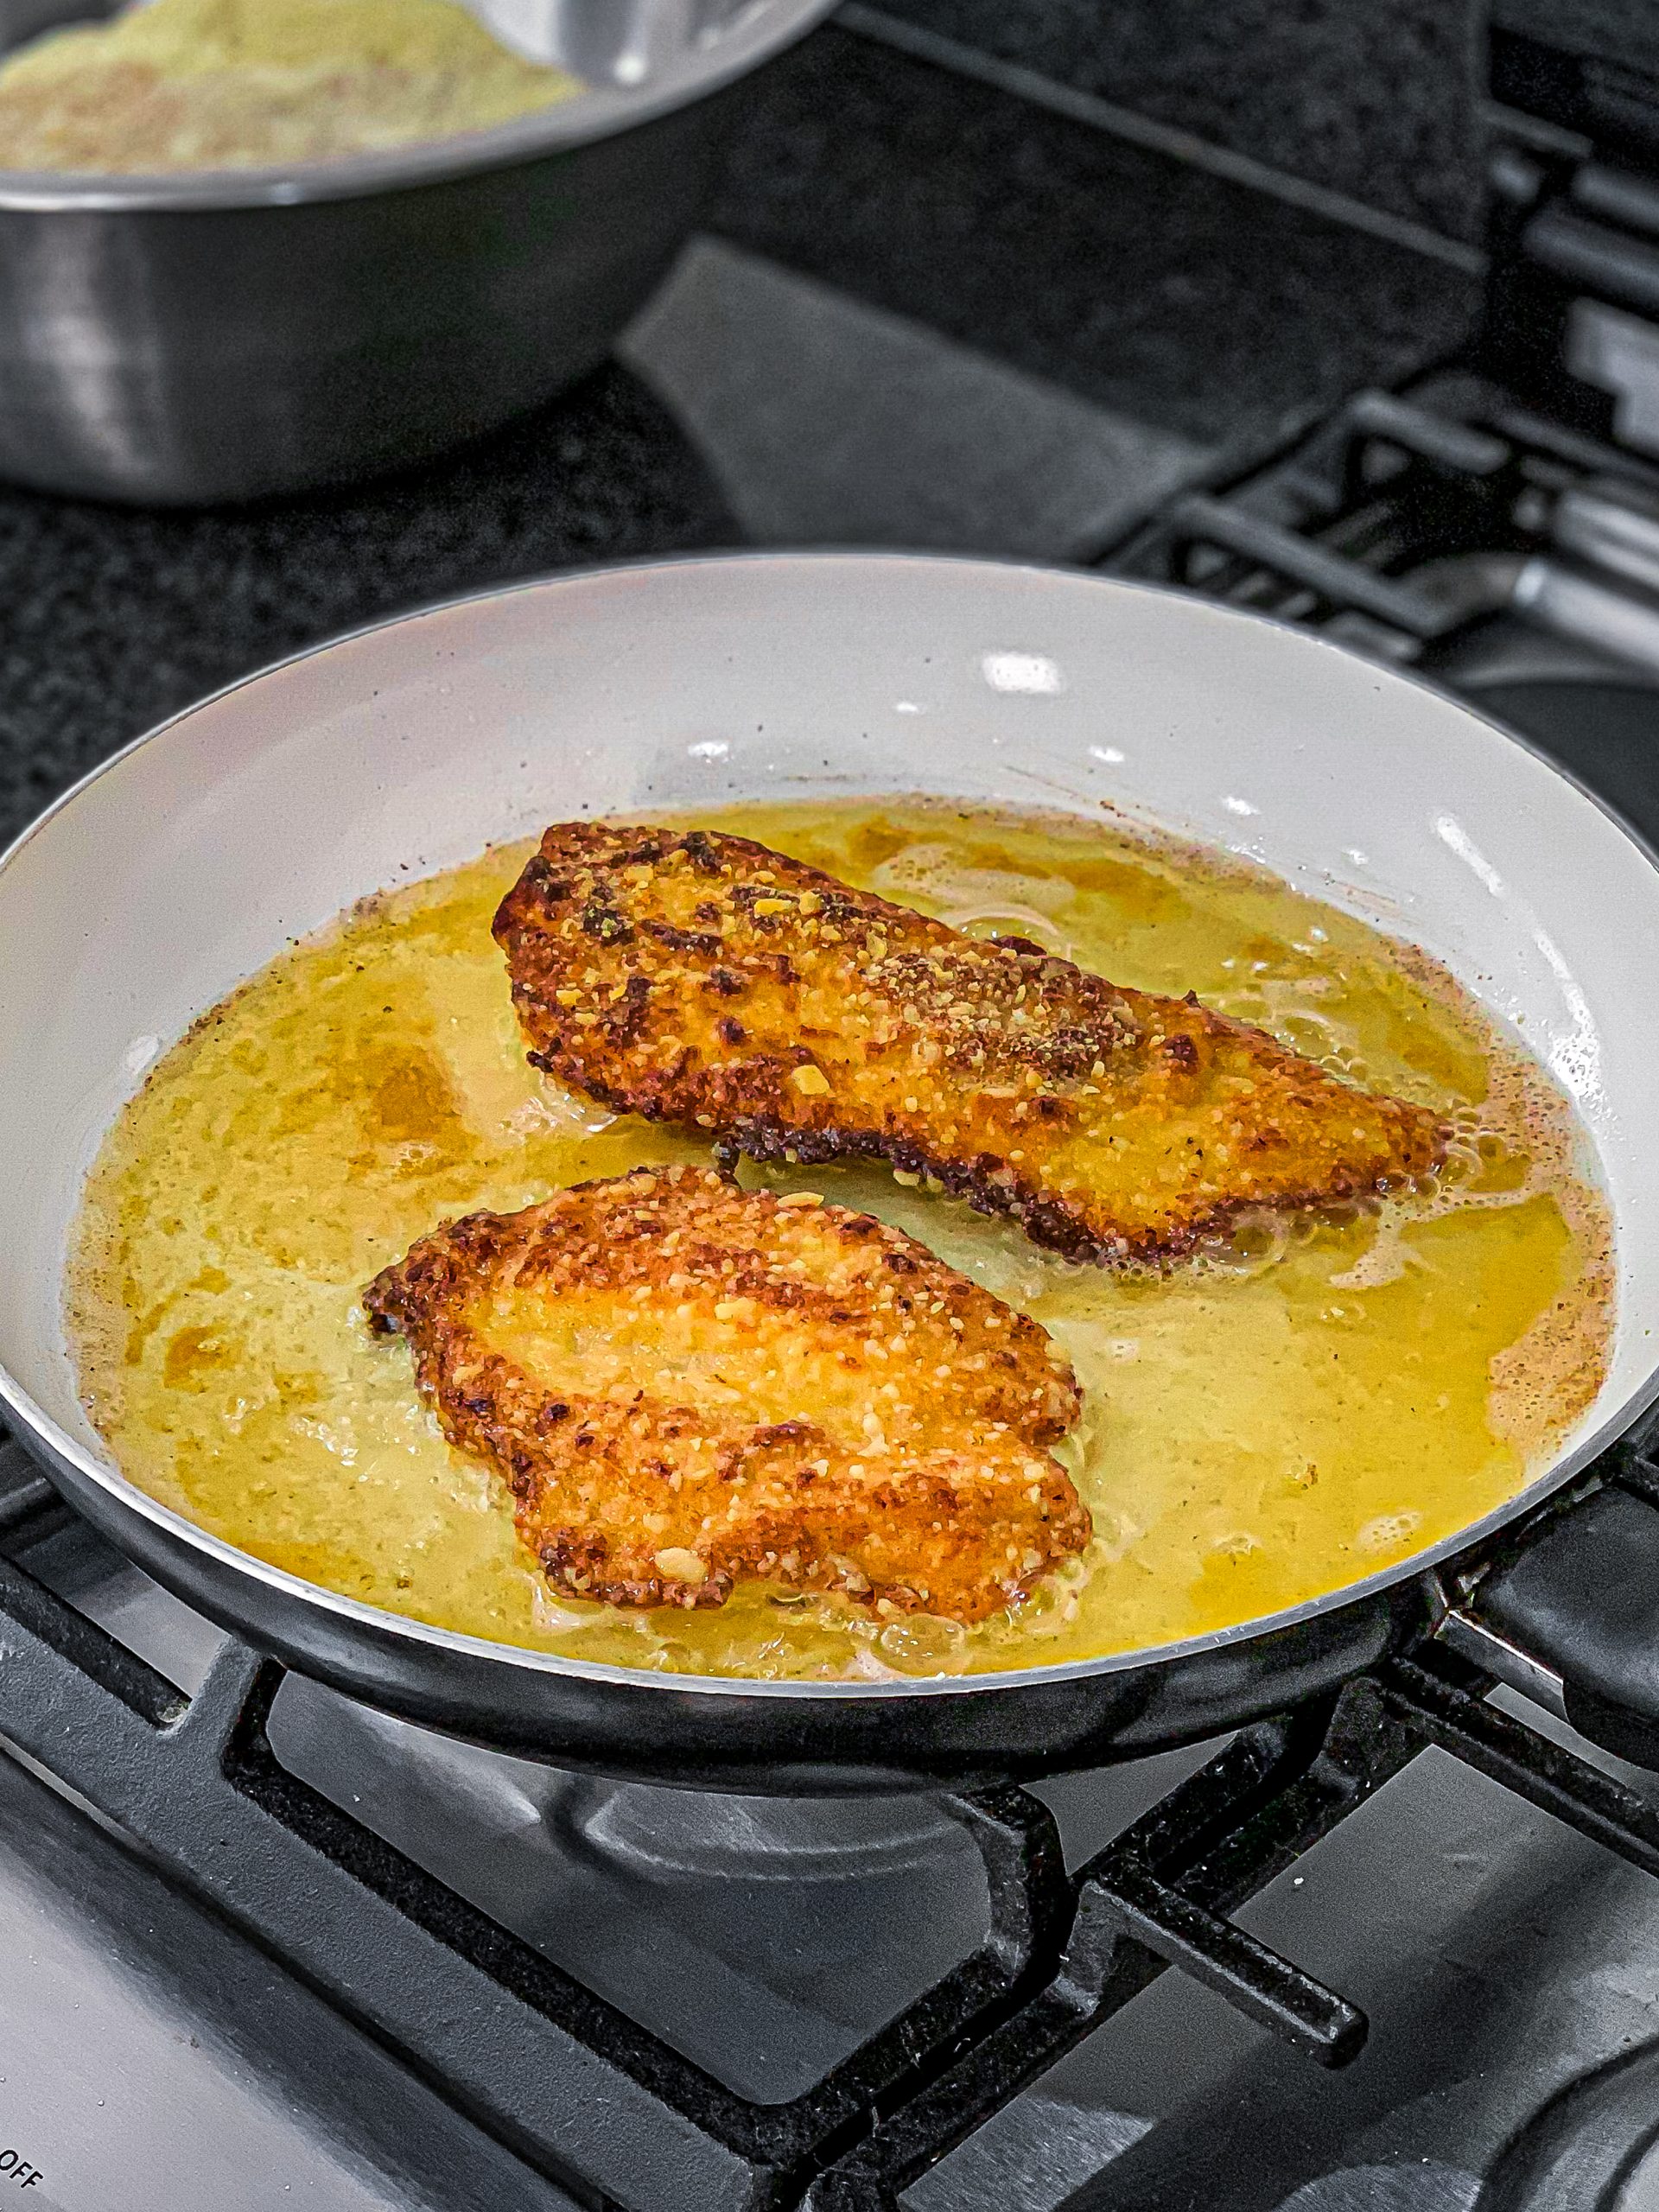 Place the fried chicken on a plate lined with paper towels to drain excess oil.